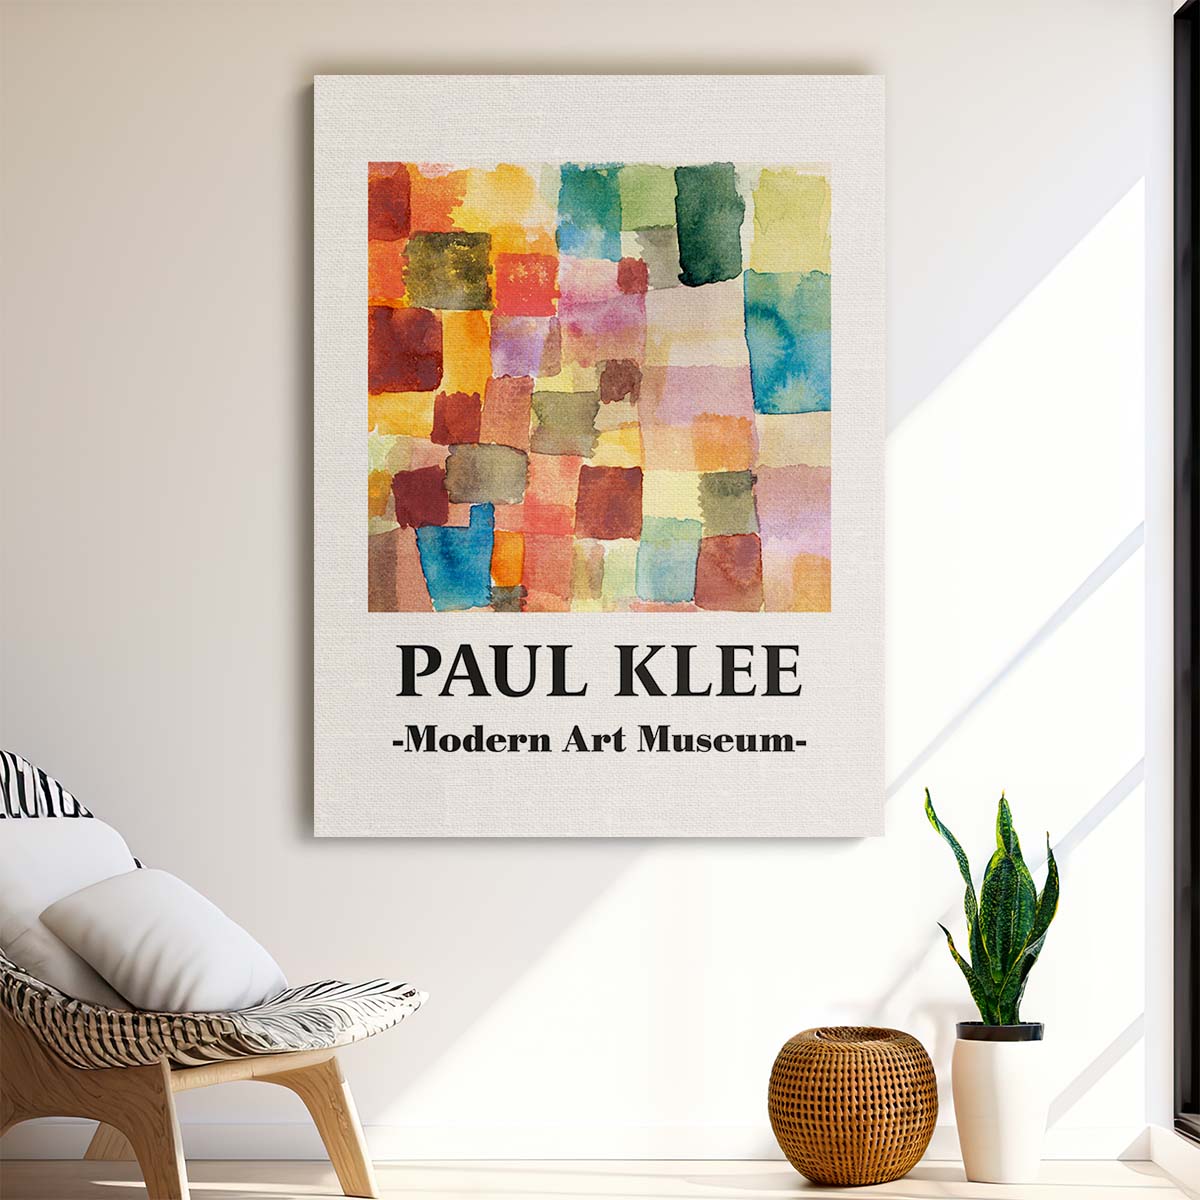 Paul Klee's 1914 Abstract Watercolor Masterpiece - Museum Poster by Luxuriance Designs, made in USA